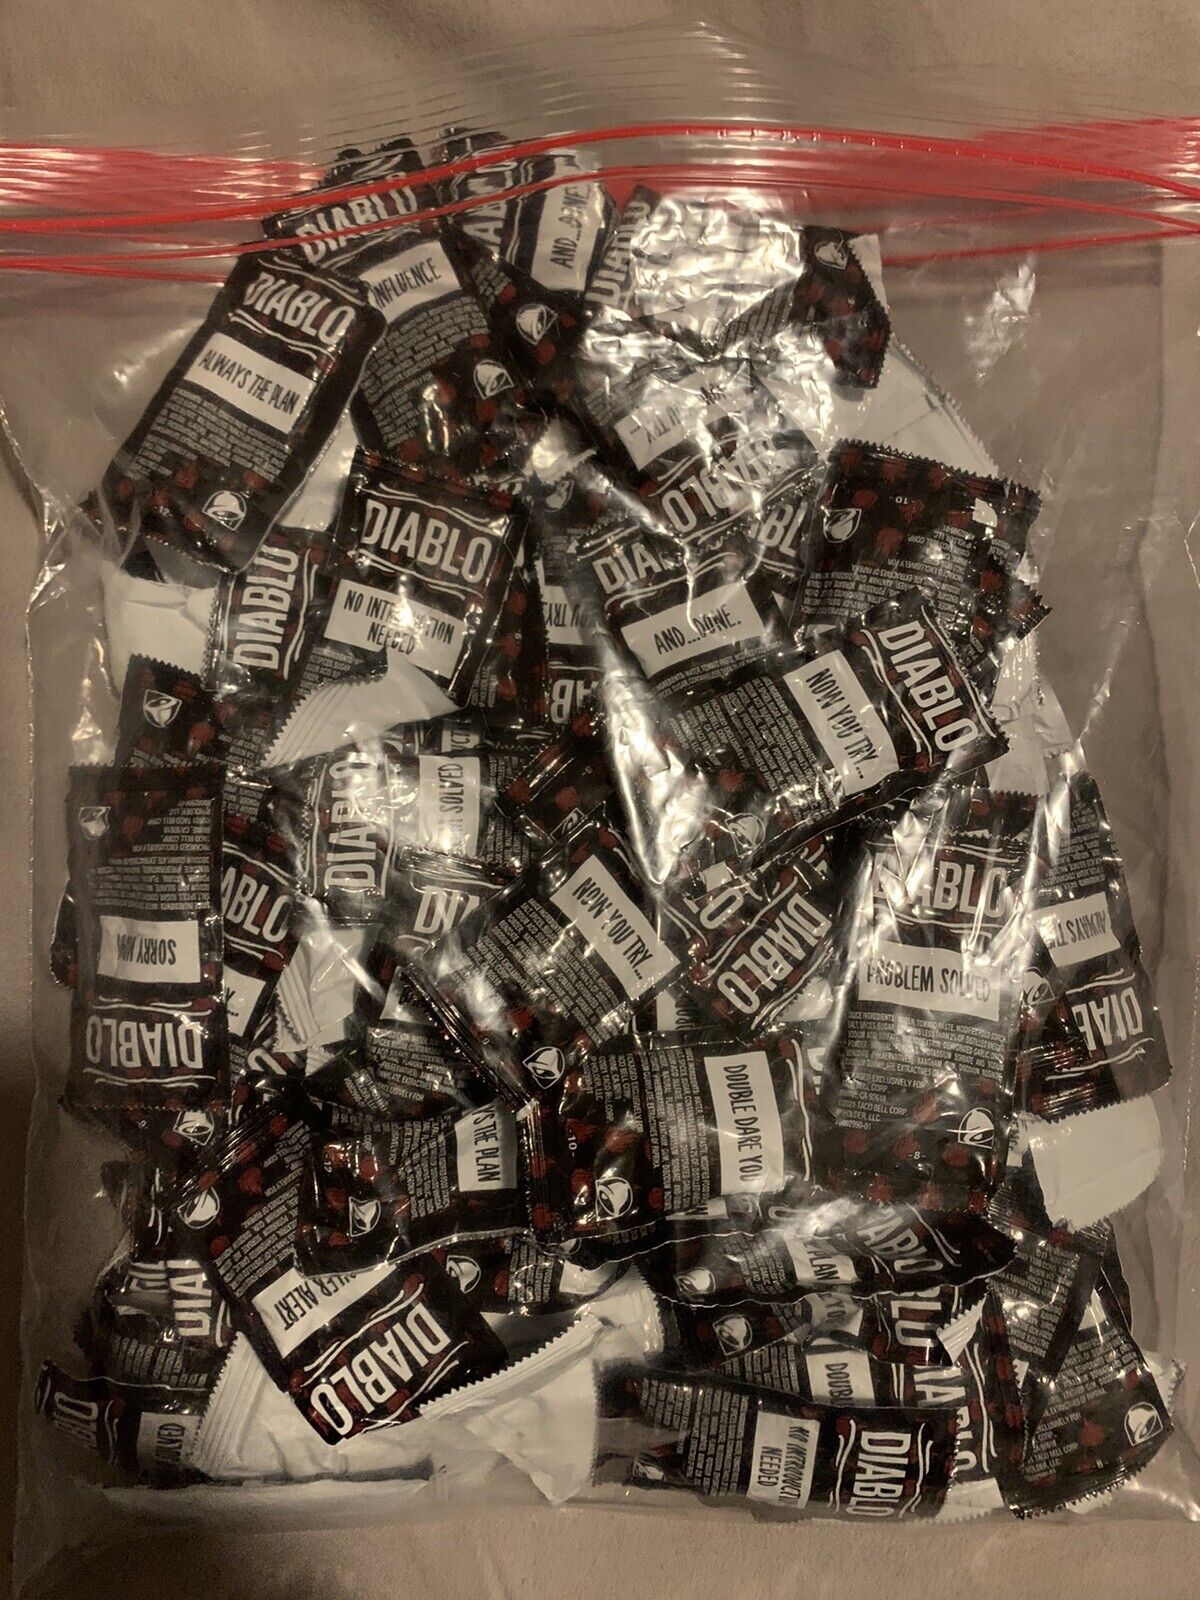 100 Taco Bell DIABLO  Sauce Packets.   New And Sealed Fresh